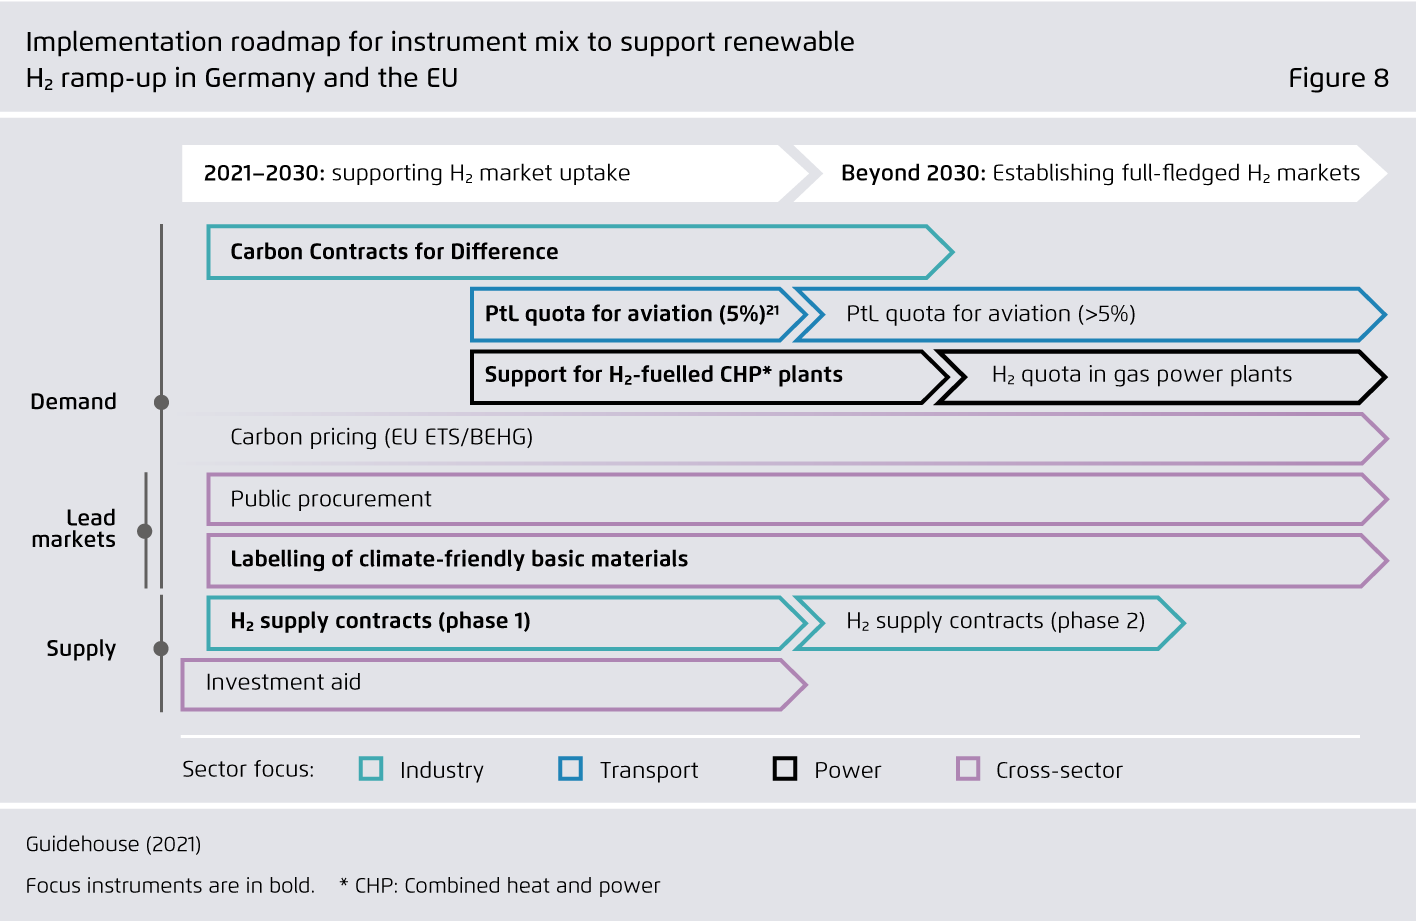 Preview for Implementation roadmap for instrument mix to support renewable H₂ ramp-up in Germany and the EU